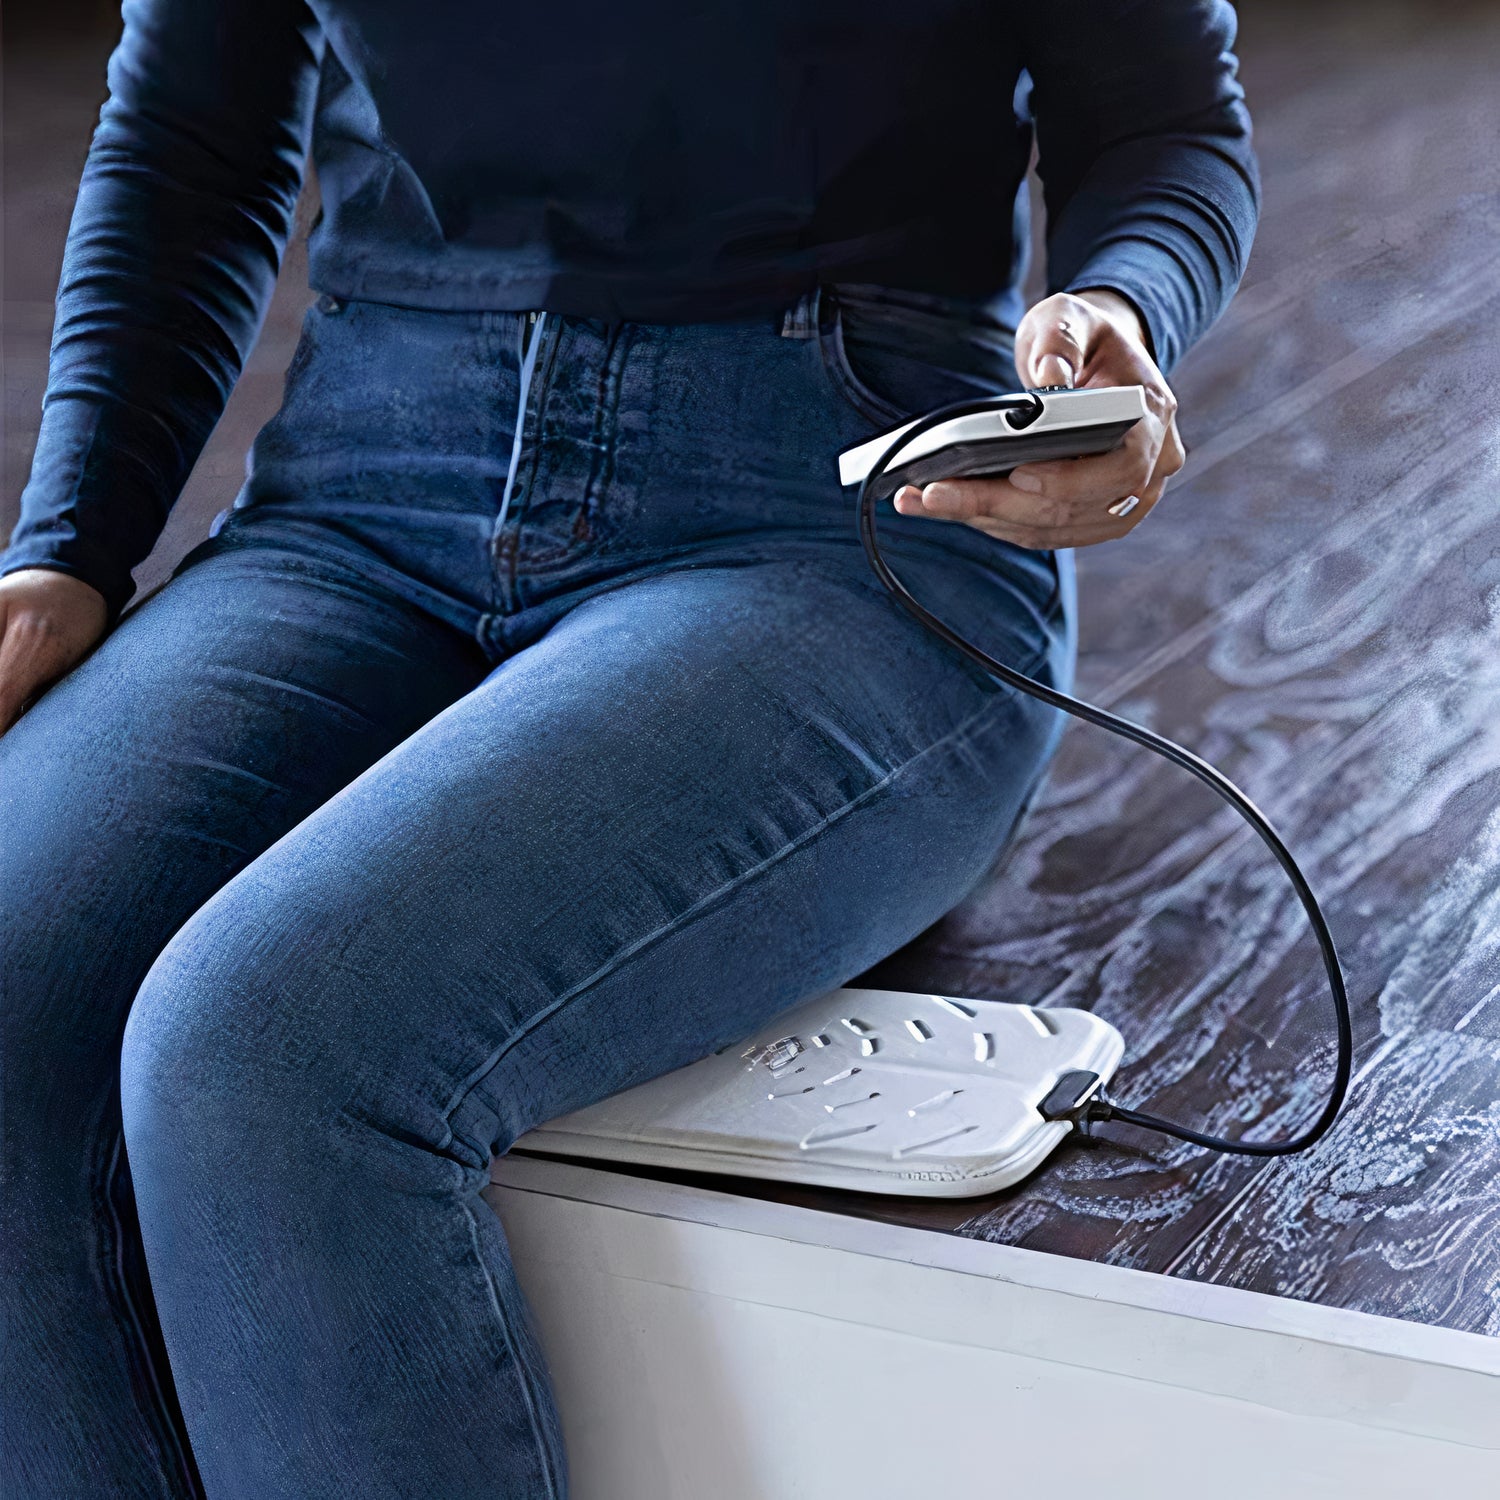 girl with a pulsepad pemf machine under her leg sitting with jeans onin the uk